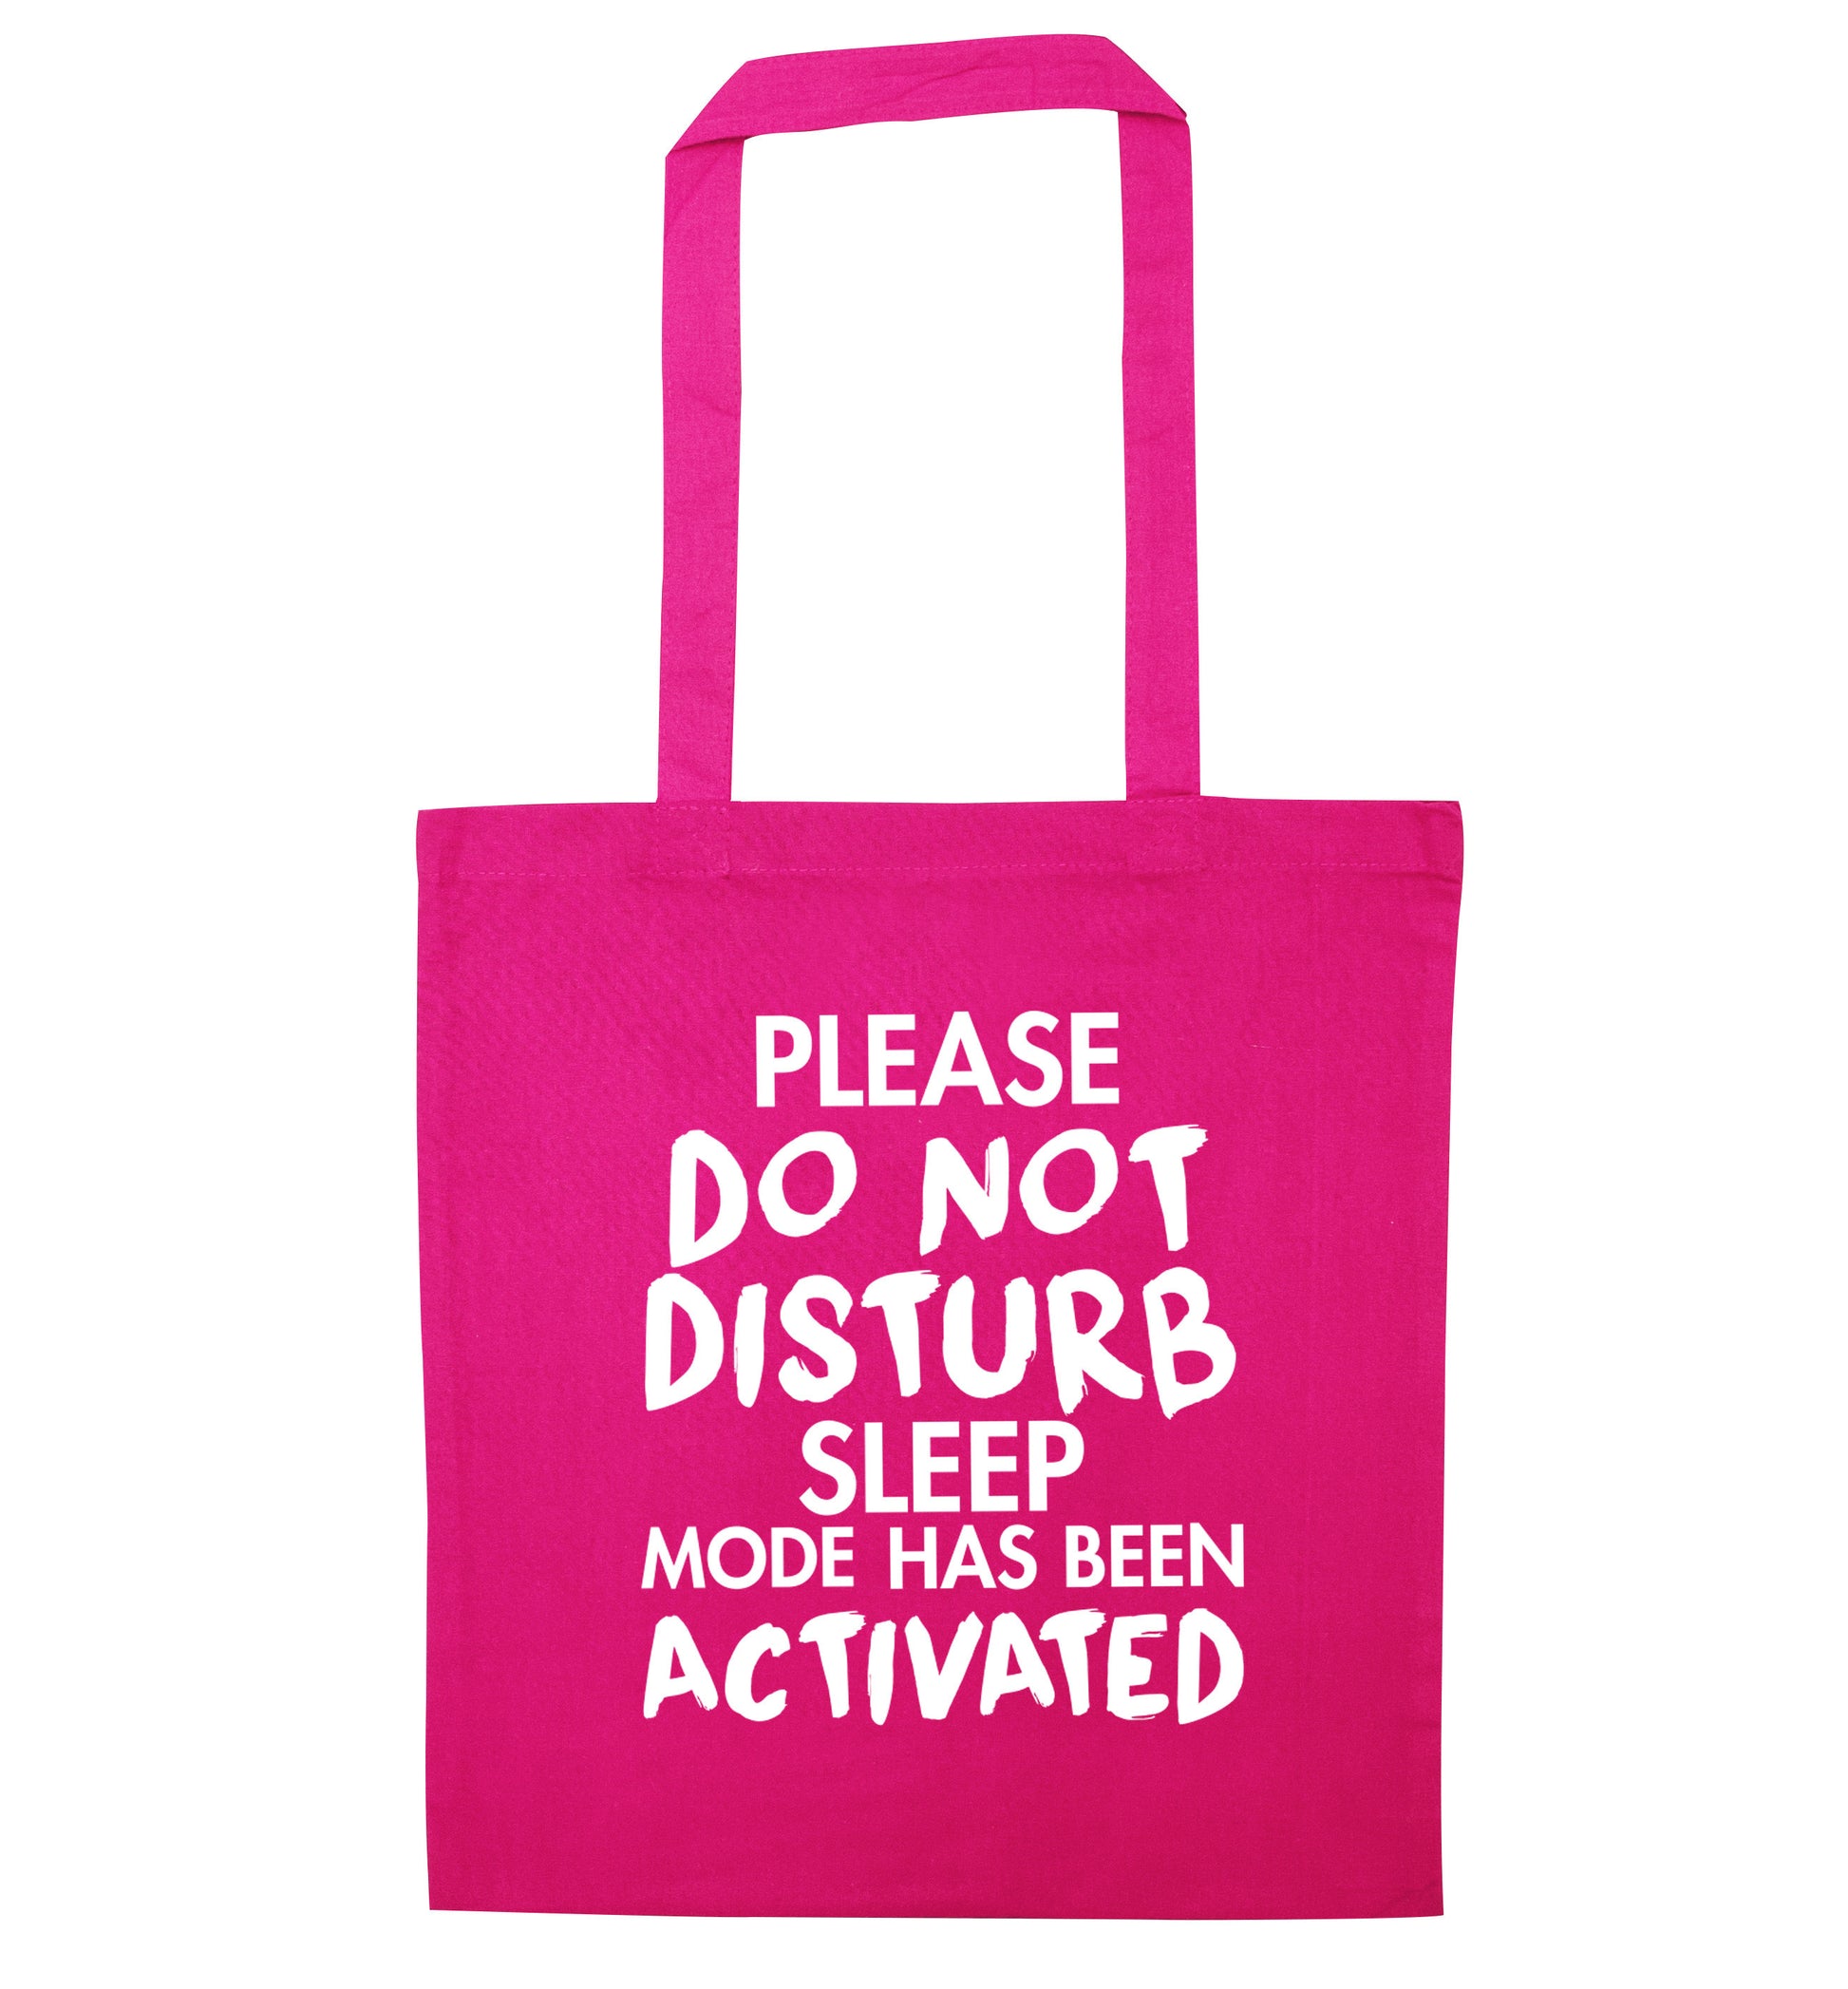 Please do not disturb sleeping mode has been activated pink tote bag